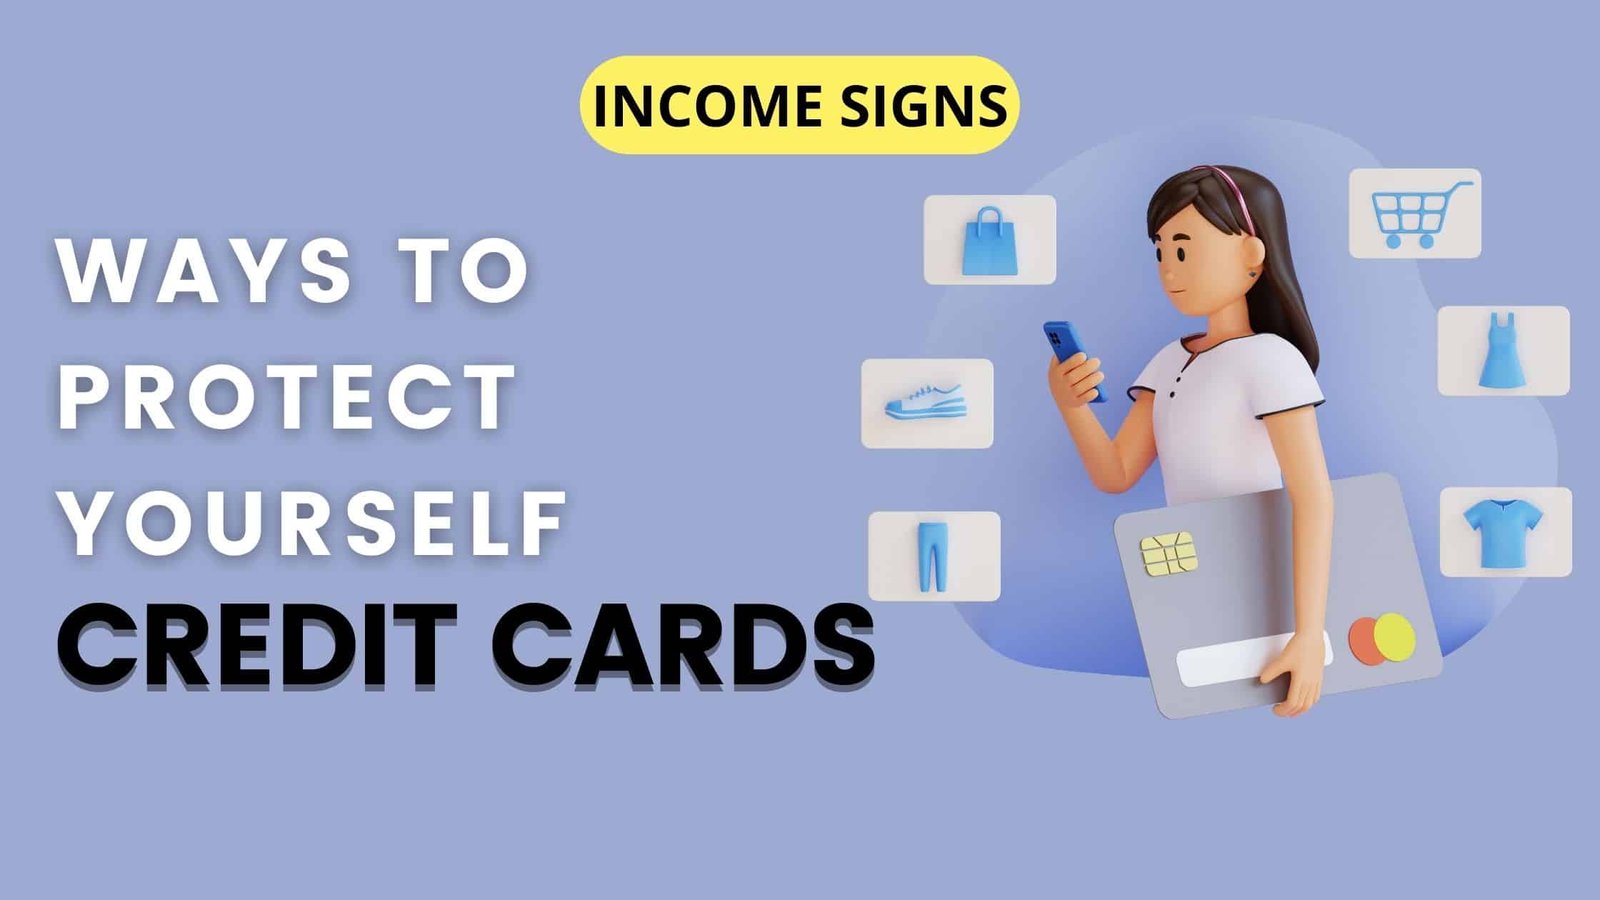 Ways to Protect Yourself from Credit Card Fraud